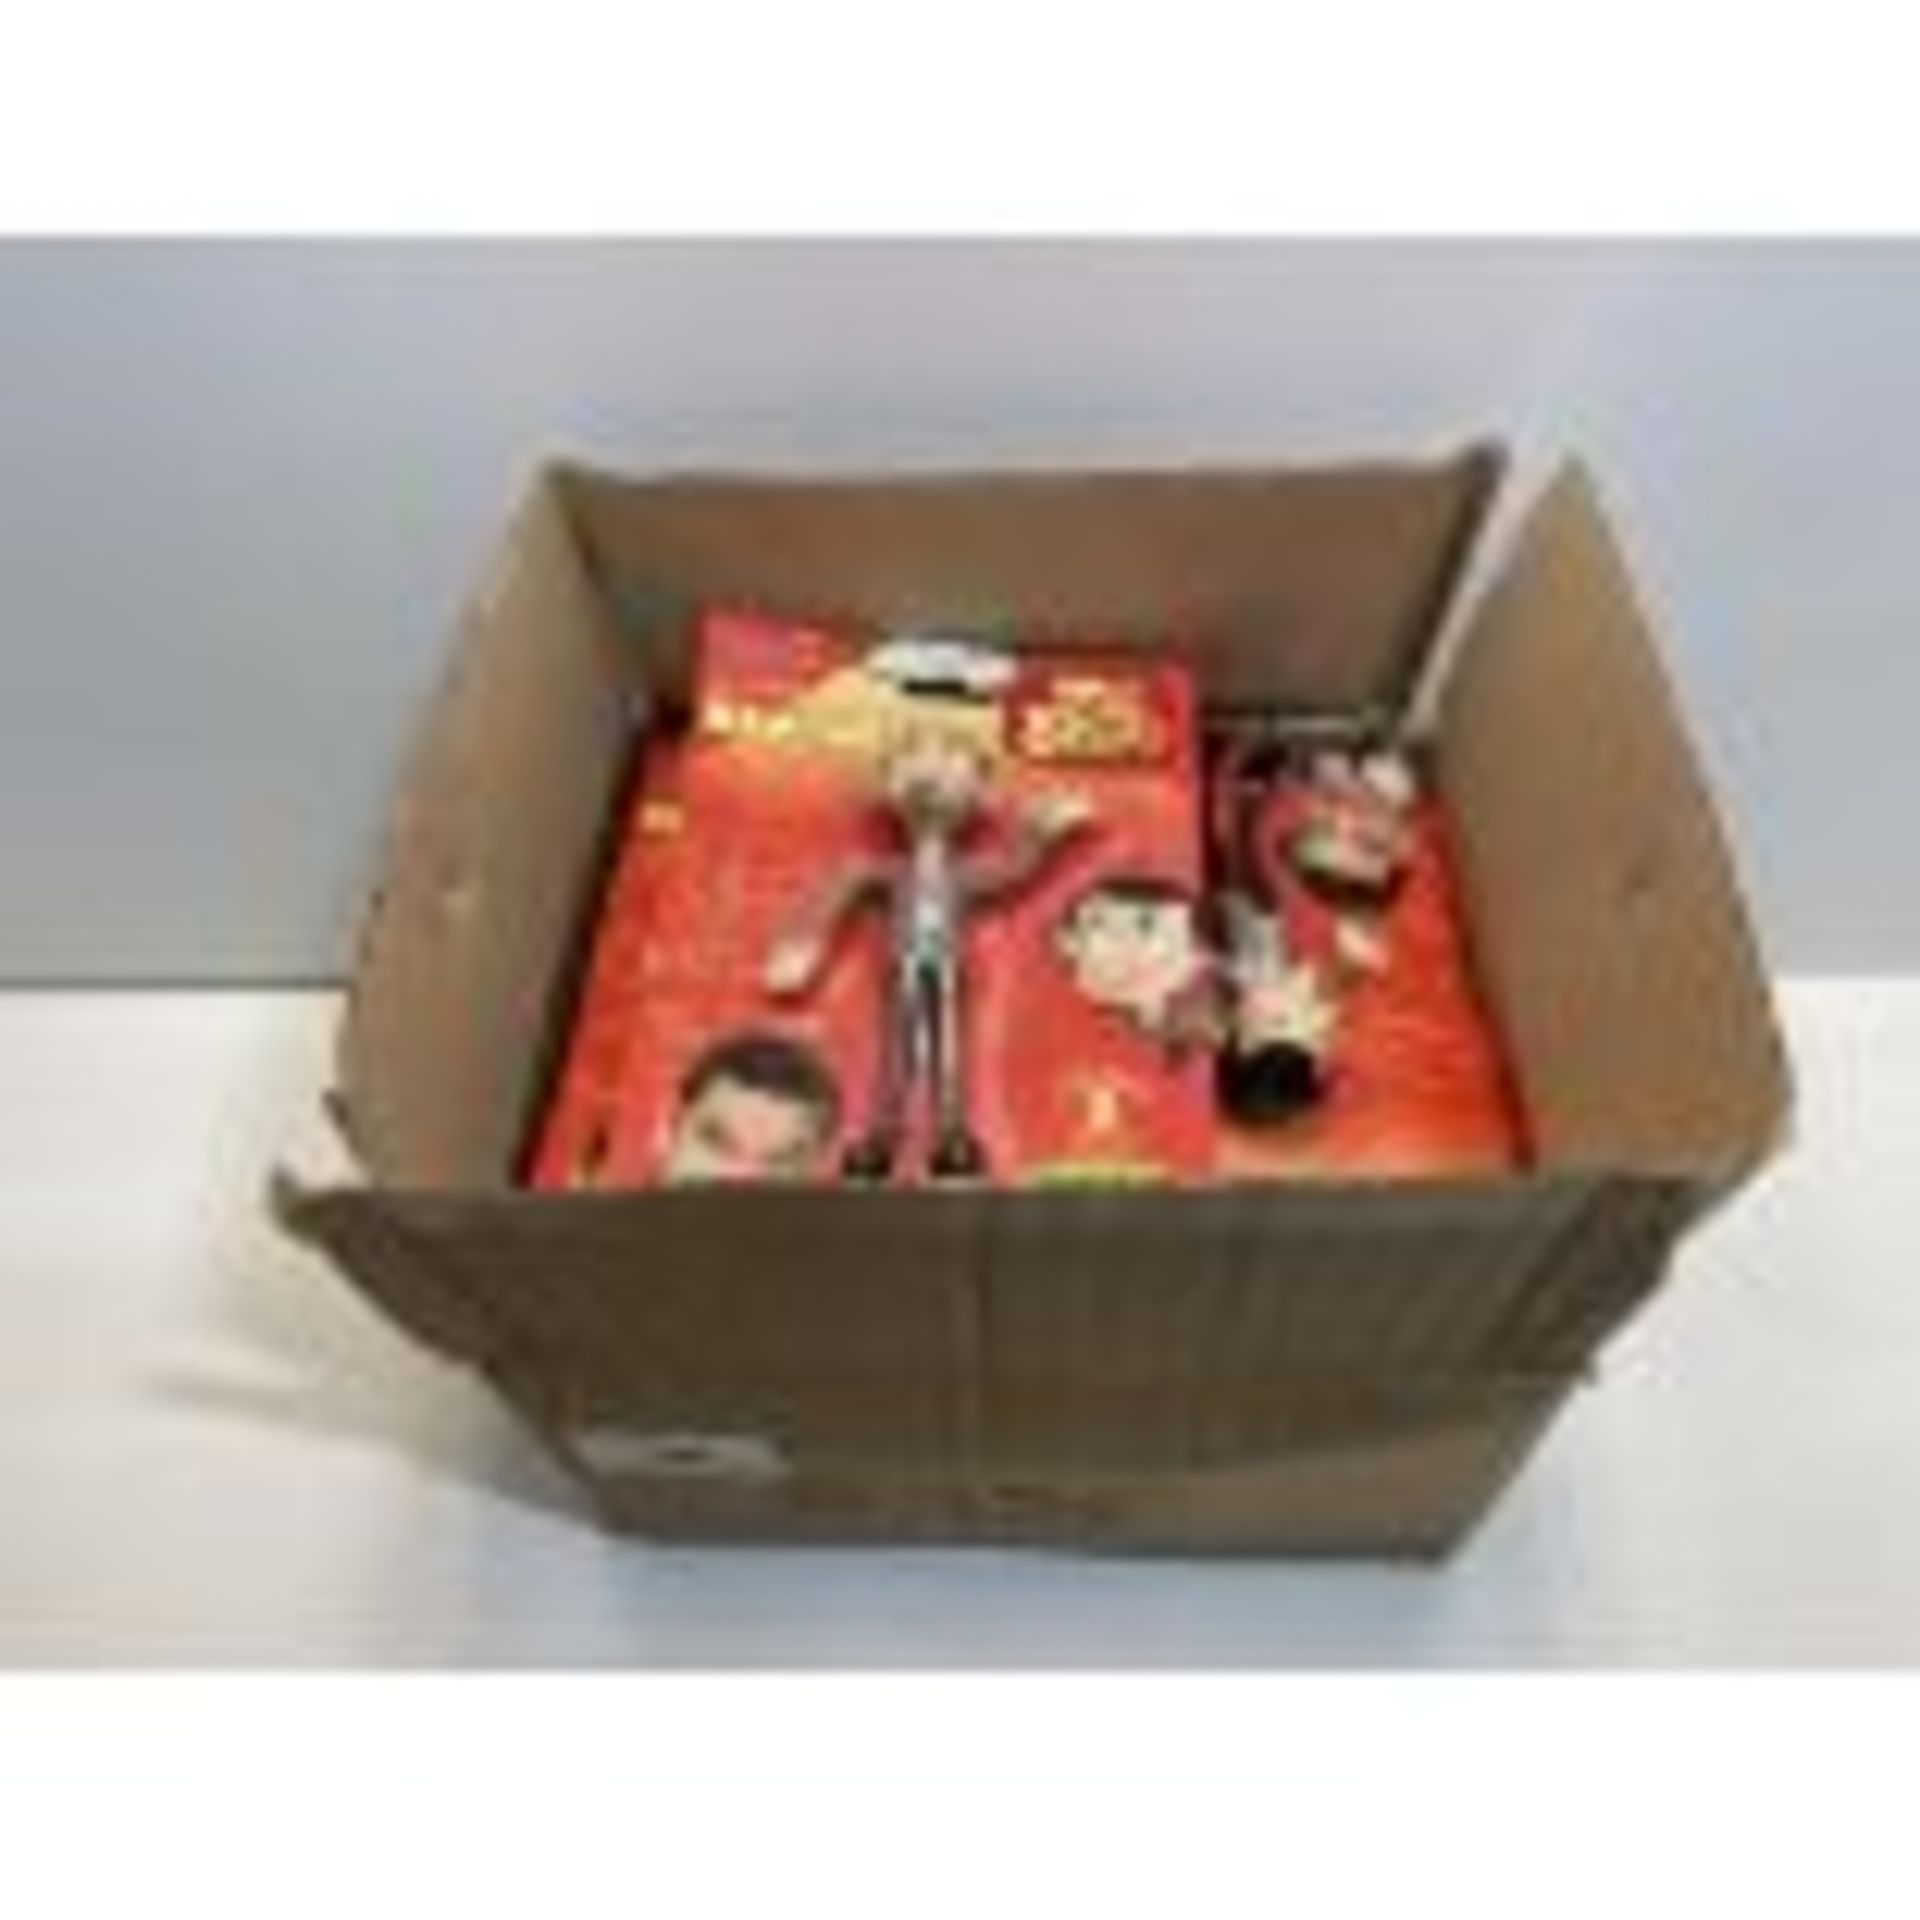 12 x 1990 NJCROCE MR BEAN BENDABLE - POSEABLE FIGURE NEW IN BLISTER PACK | 54382035013 - Image 2 of 4